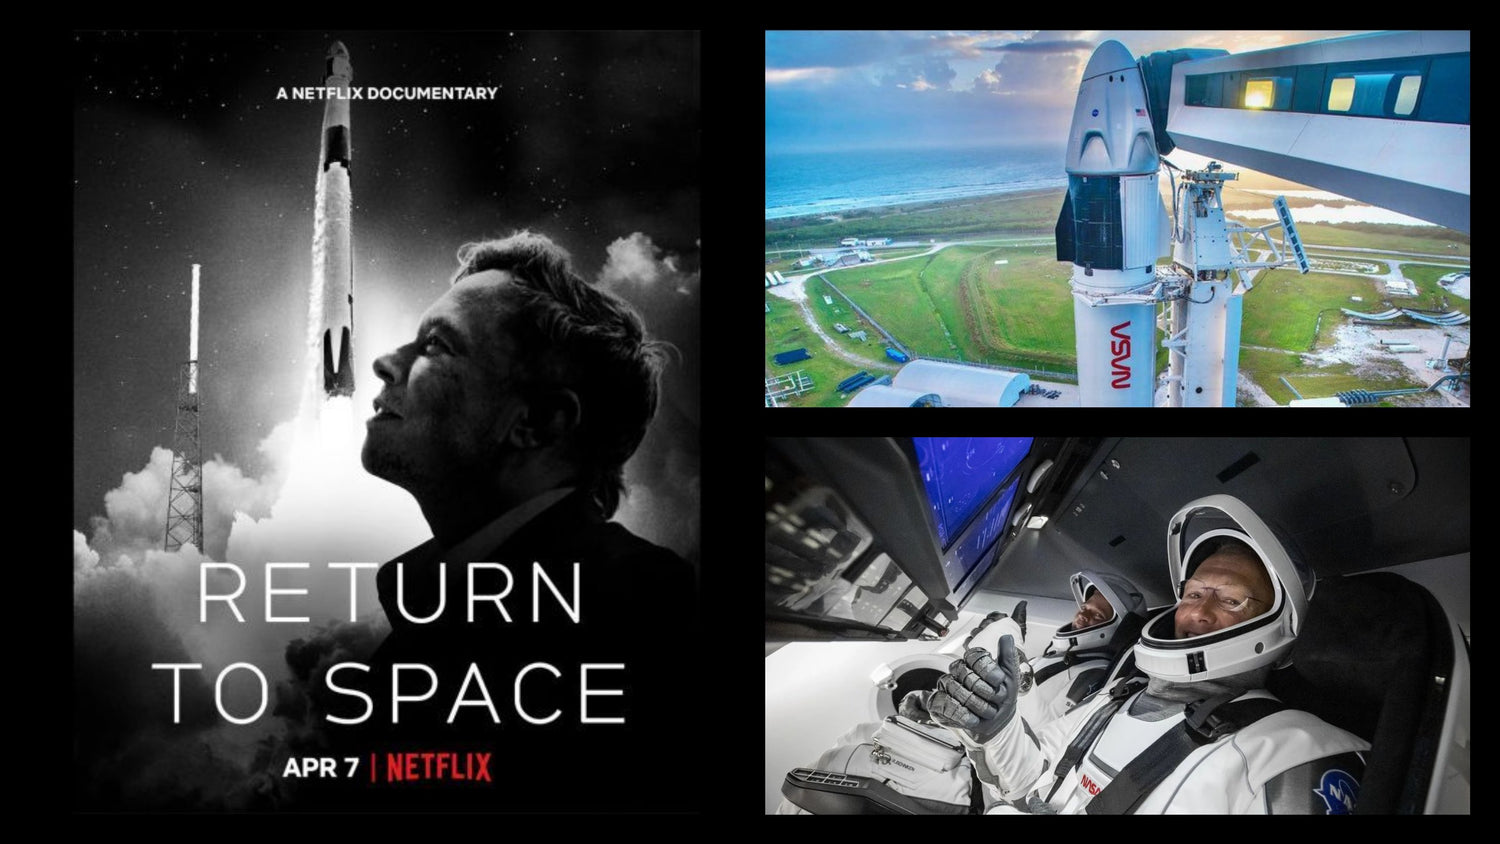 Netflix will release a documentary about SpaceX returning human spaceflight capabilities to the United States –‘Return to Space’ Trailer [VIDEO]